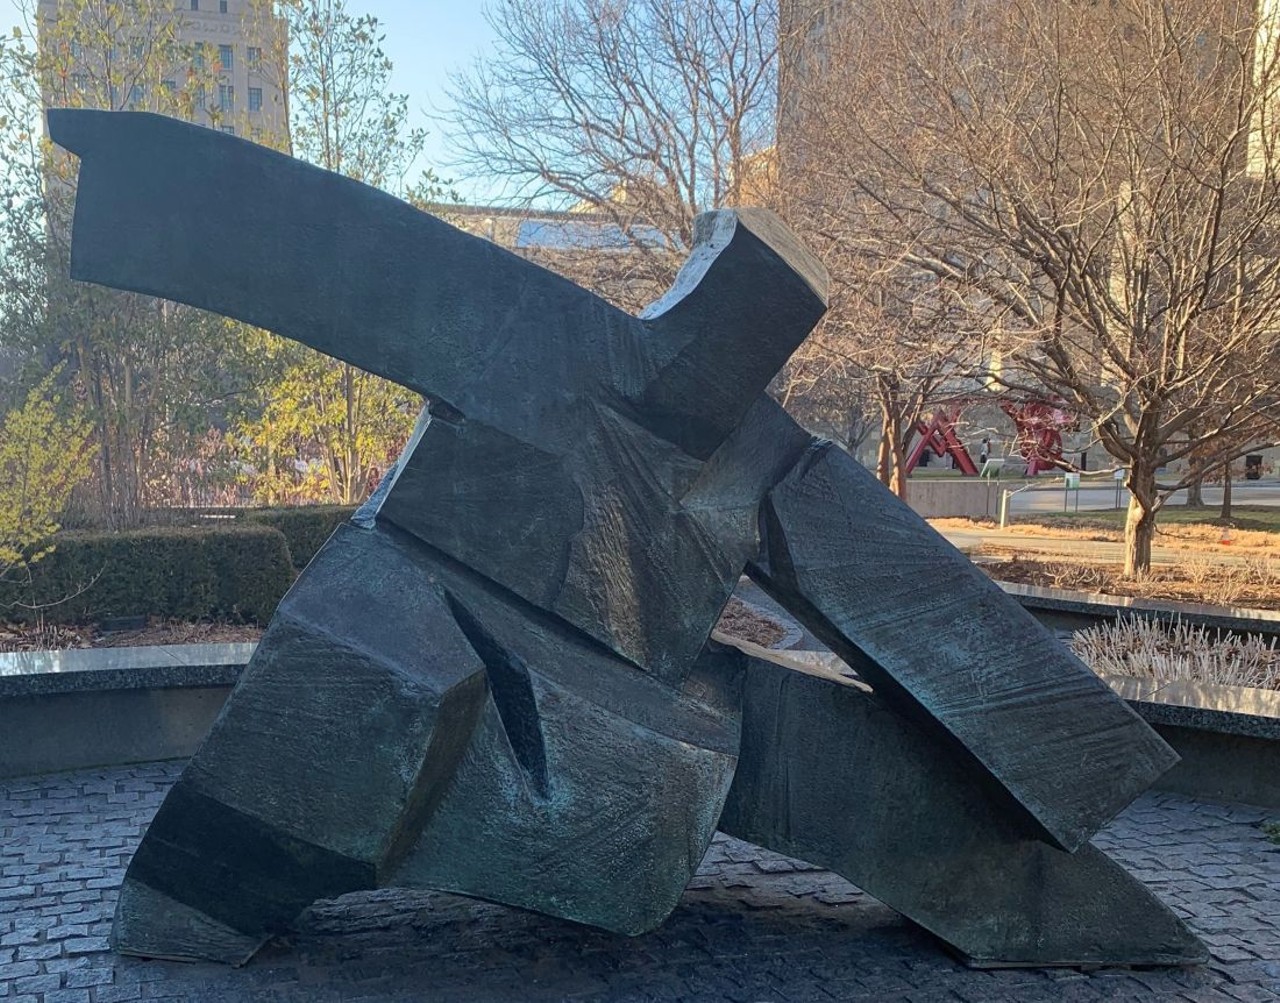 "Tai-chi Single Whip&#148;
Citygarden Sculpture Park (801 Market Street)
Made by Taiwanese artist Ju Ming.
Photo credit: Photo credit: Riverfront Times / @riverfronttimes on Instagram